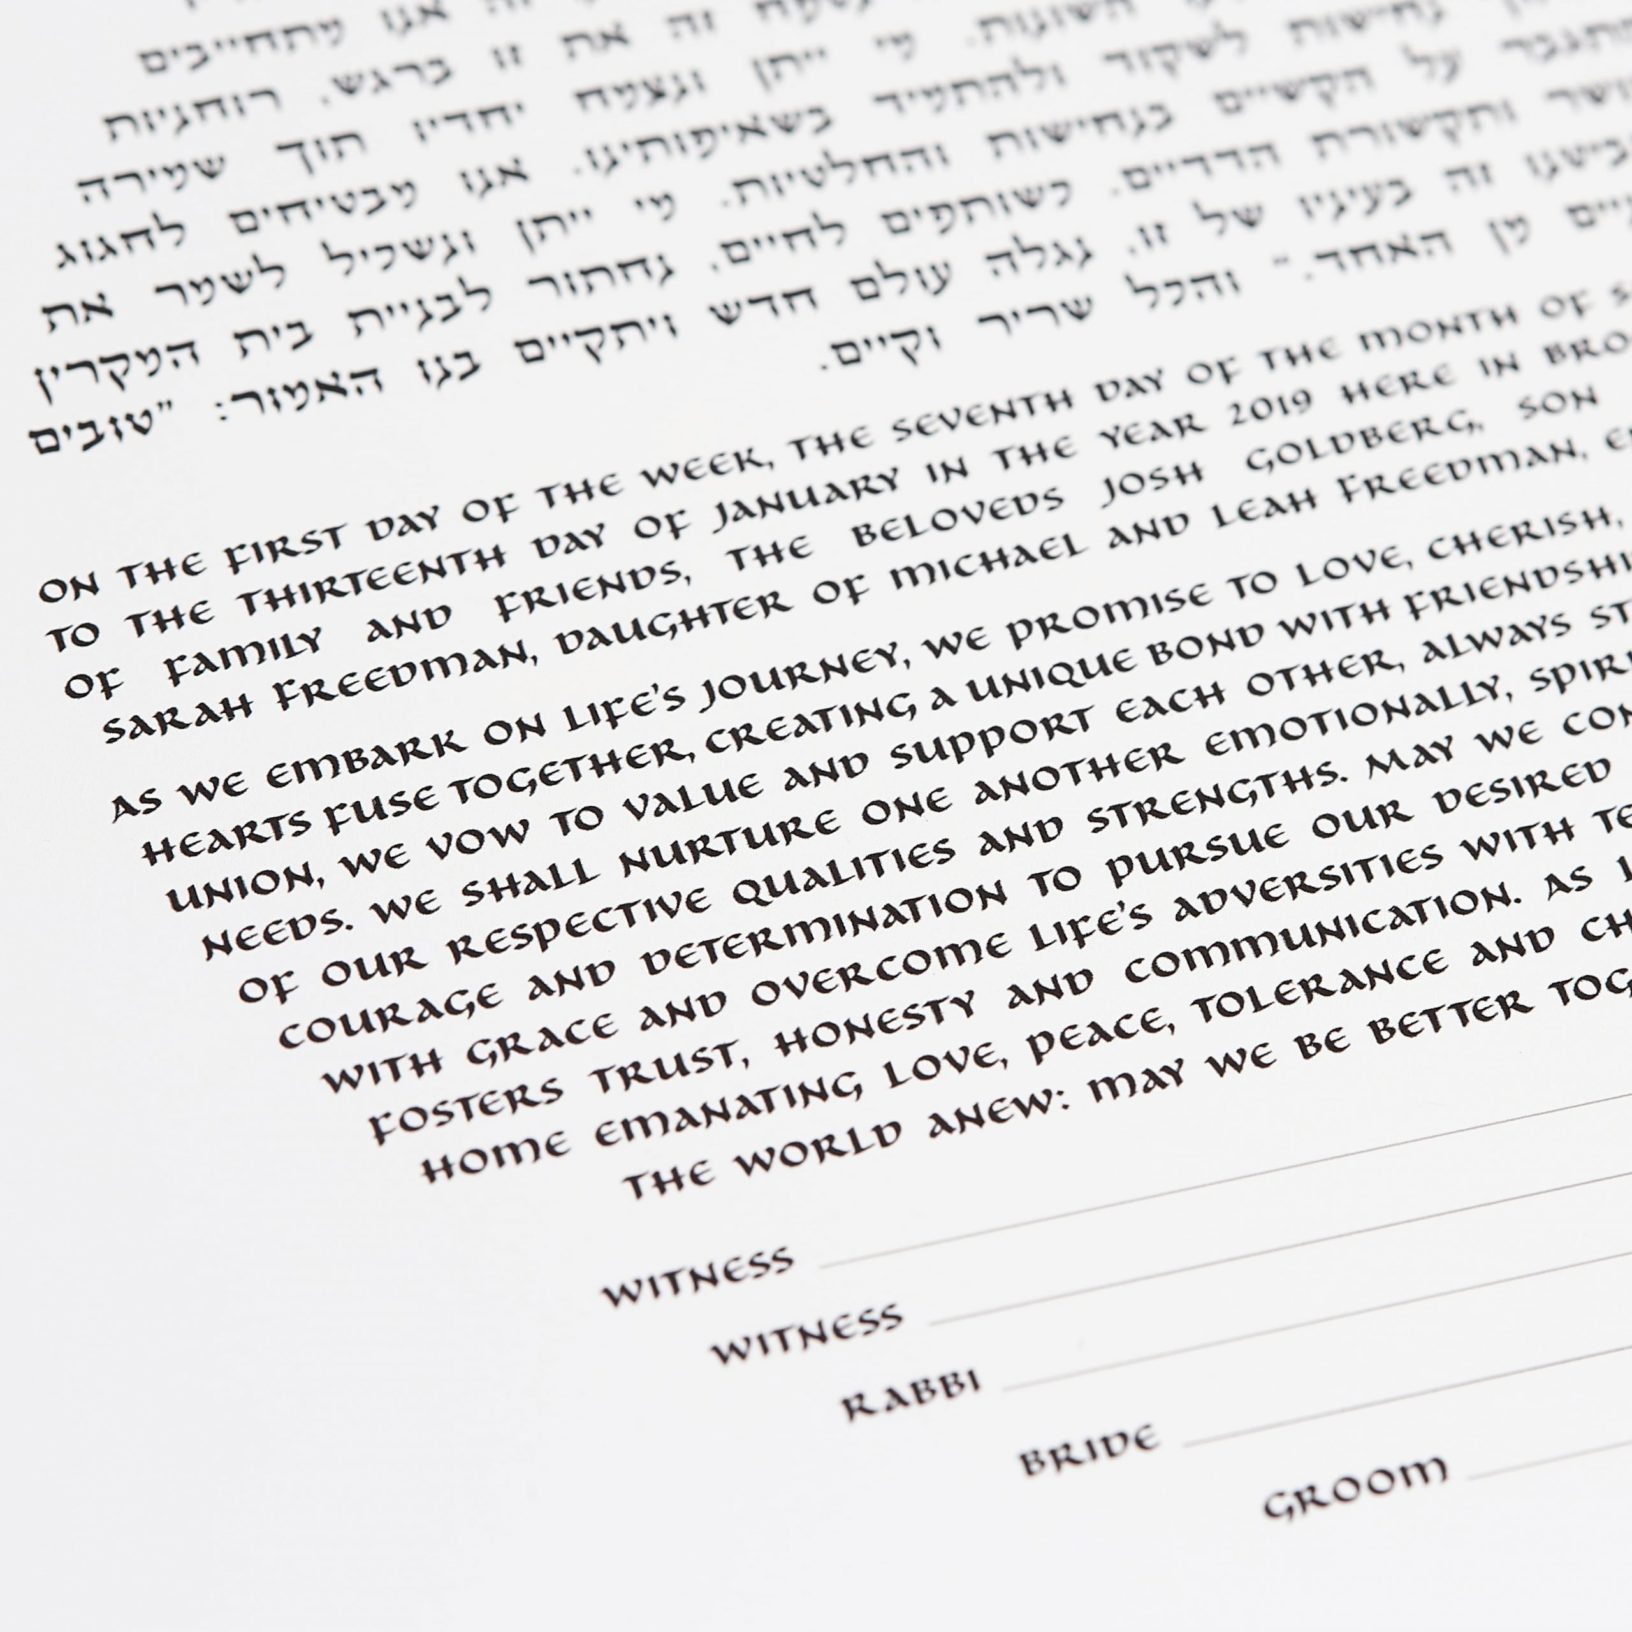 DIY on Arches® Paper - Circular Text on Vertical Background Ketubah Jewish Marriage Contracts by You